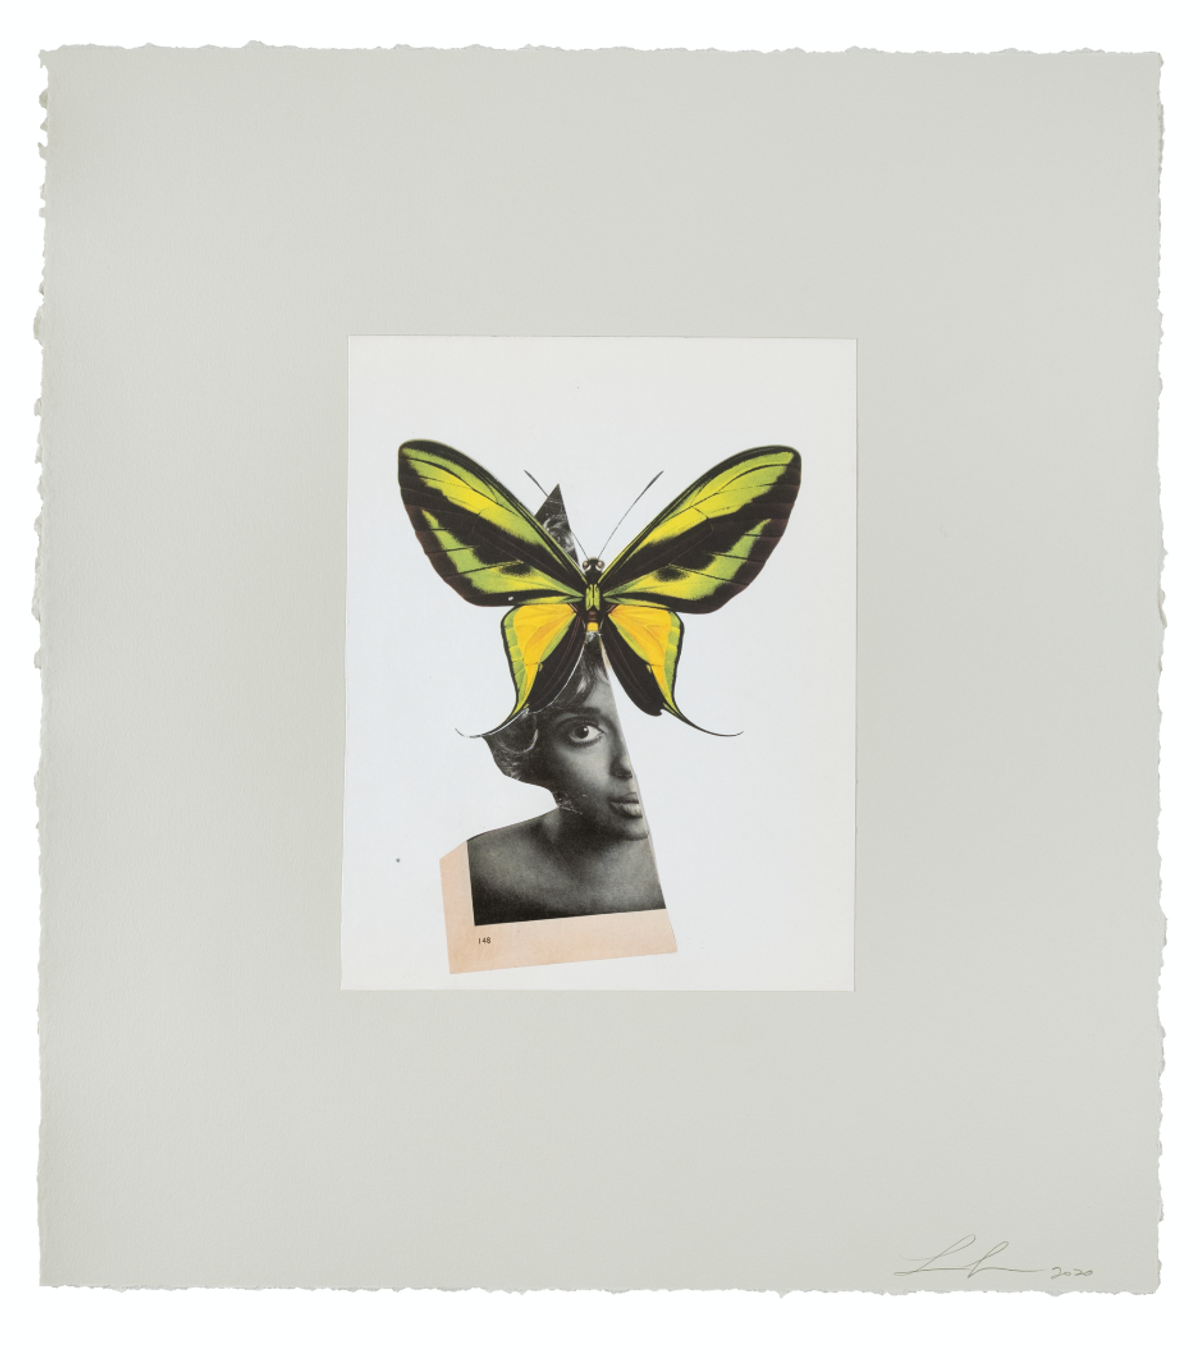 Lorna Simpson, Queen Butterfly (2020) © Lorna Simpson. Courtesy the artist and Hauser & Wirth. Photo by James Wang